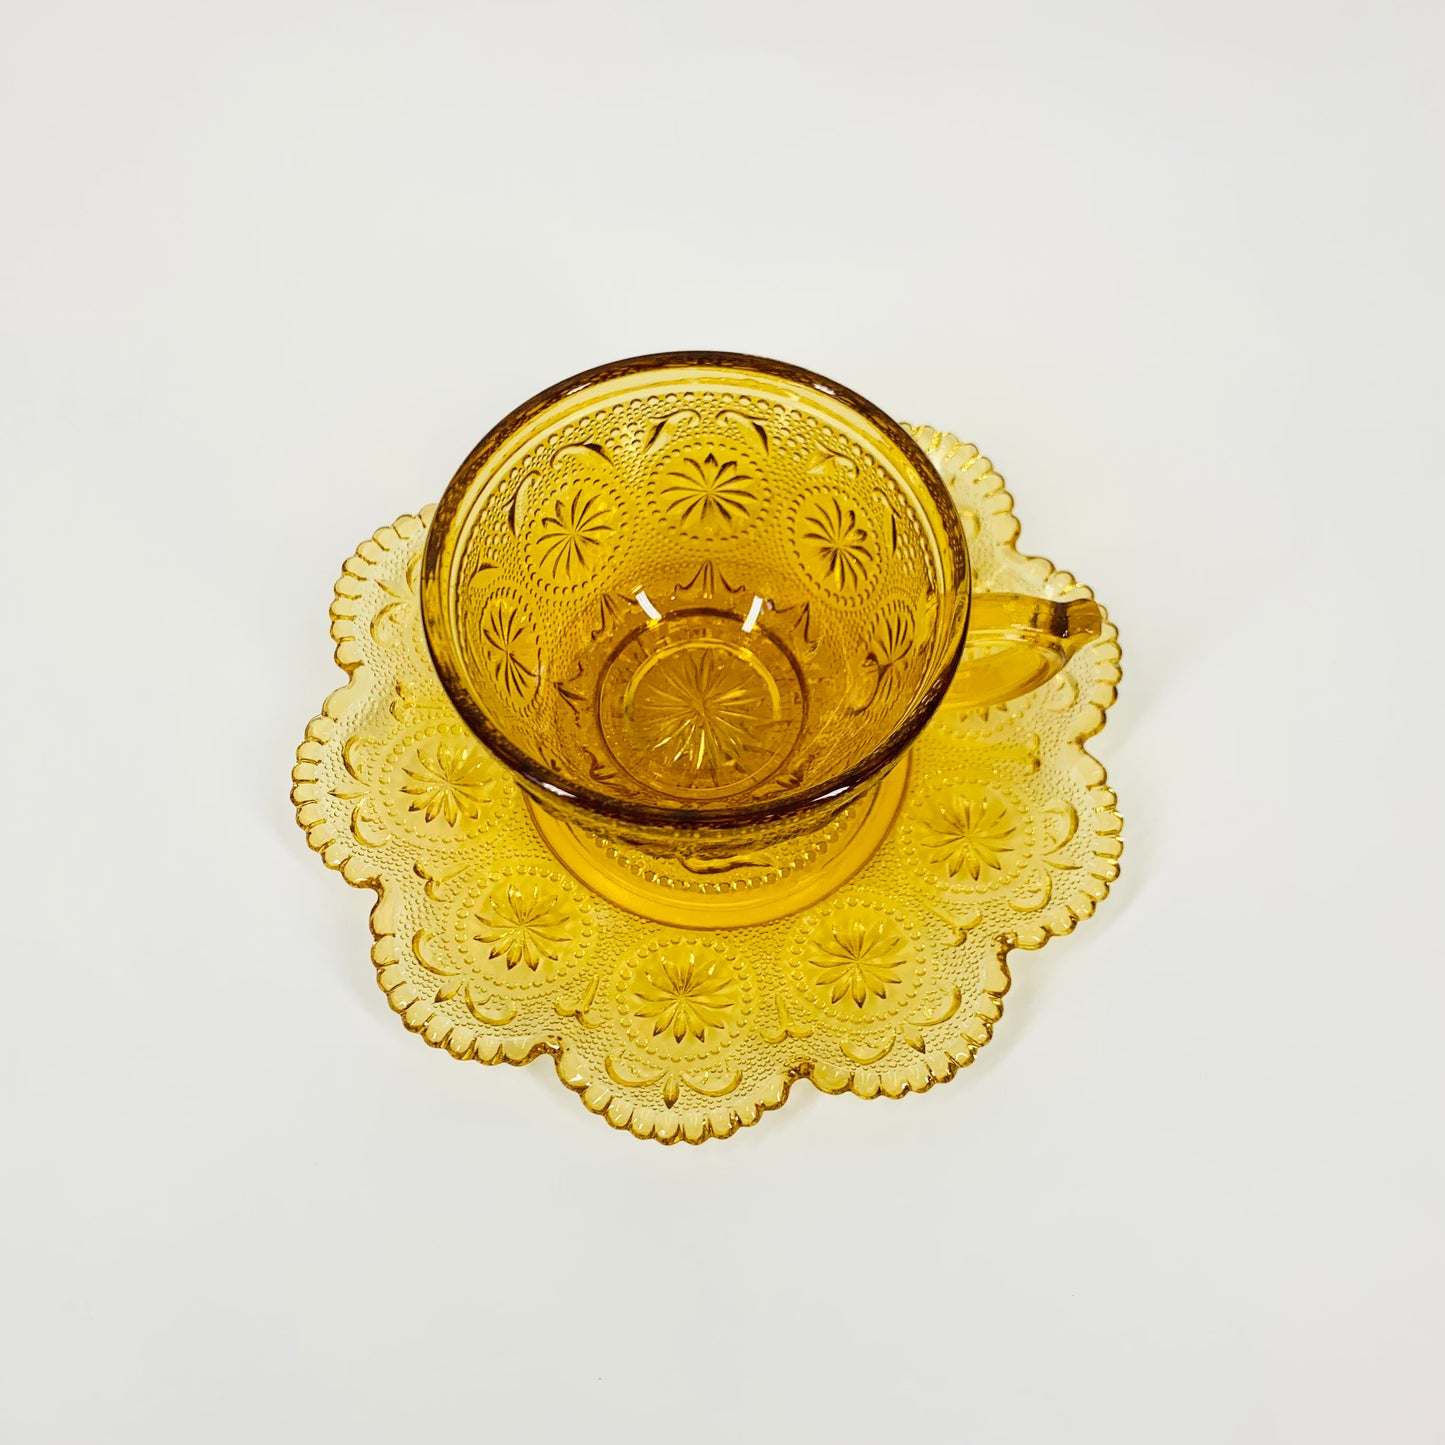 ANTIQUE AMBER PRESSED GLASS TEA CUP & SAUCER